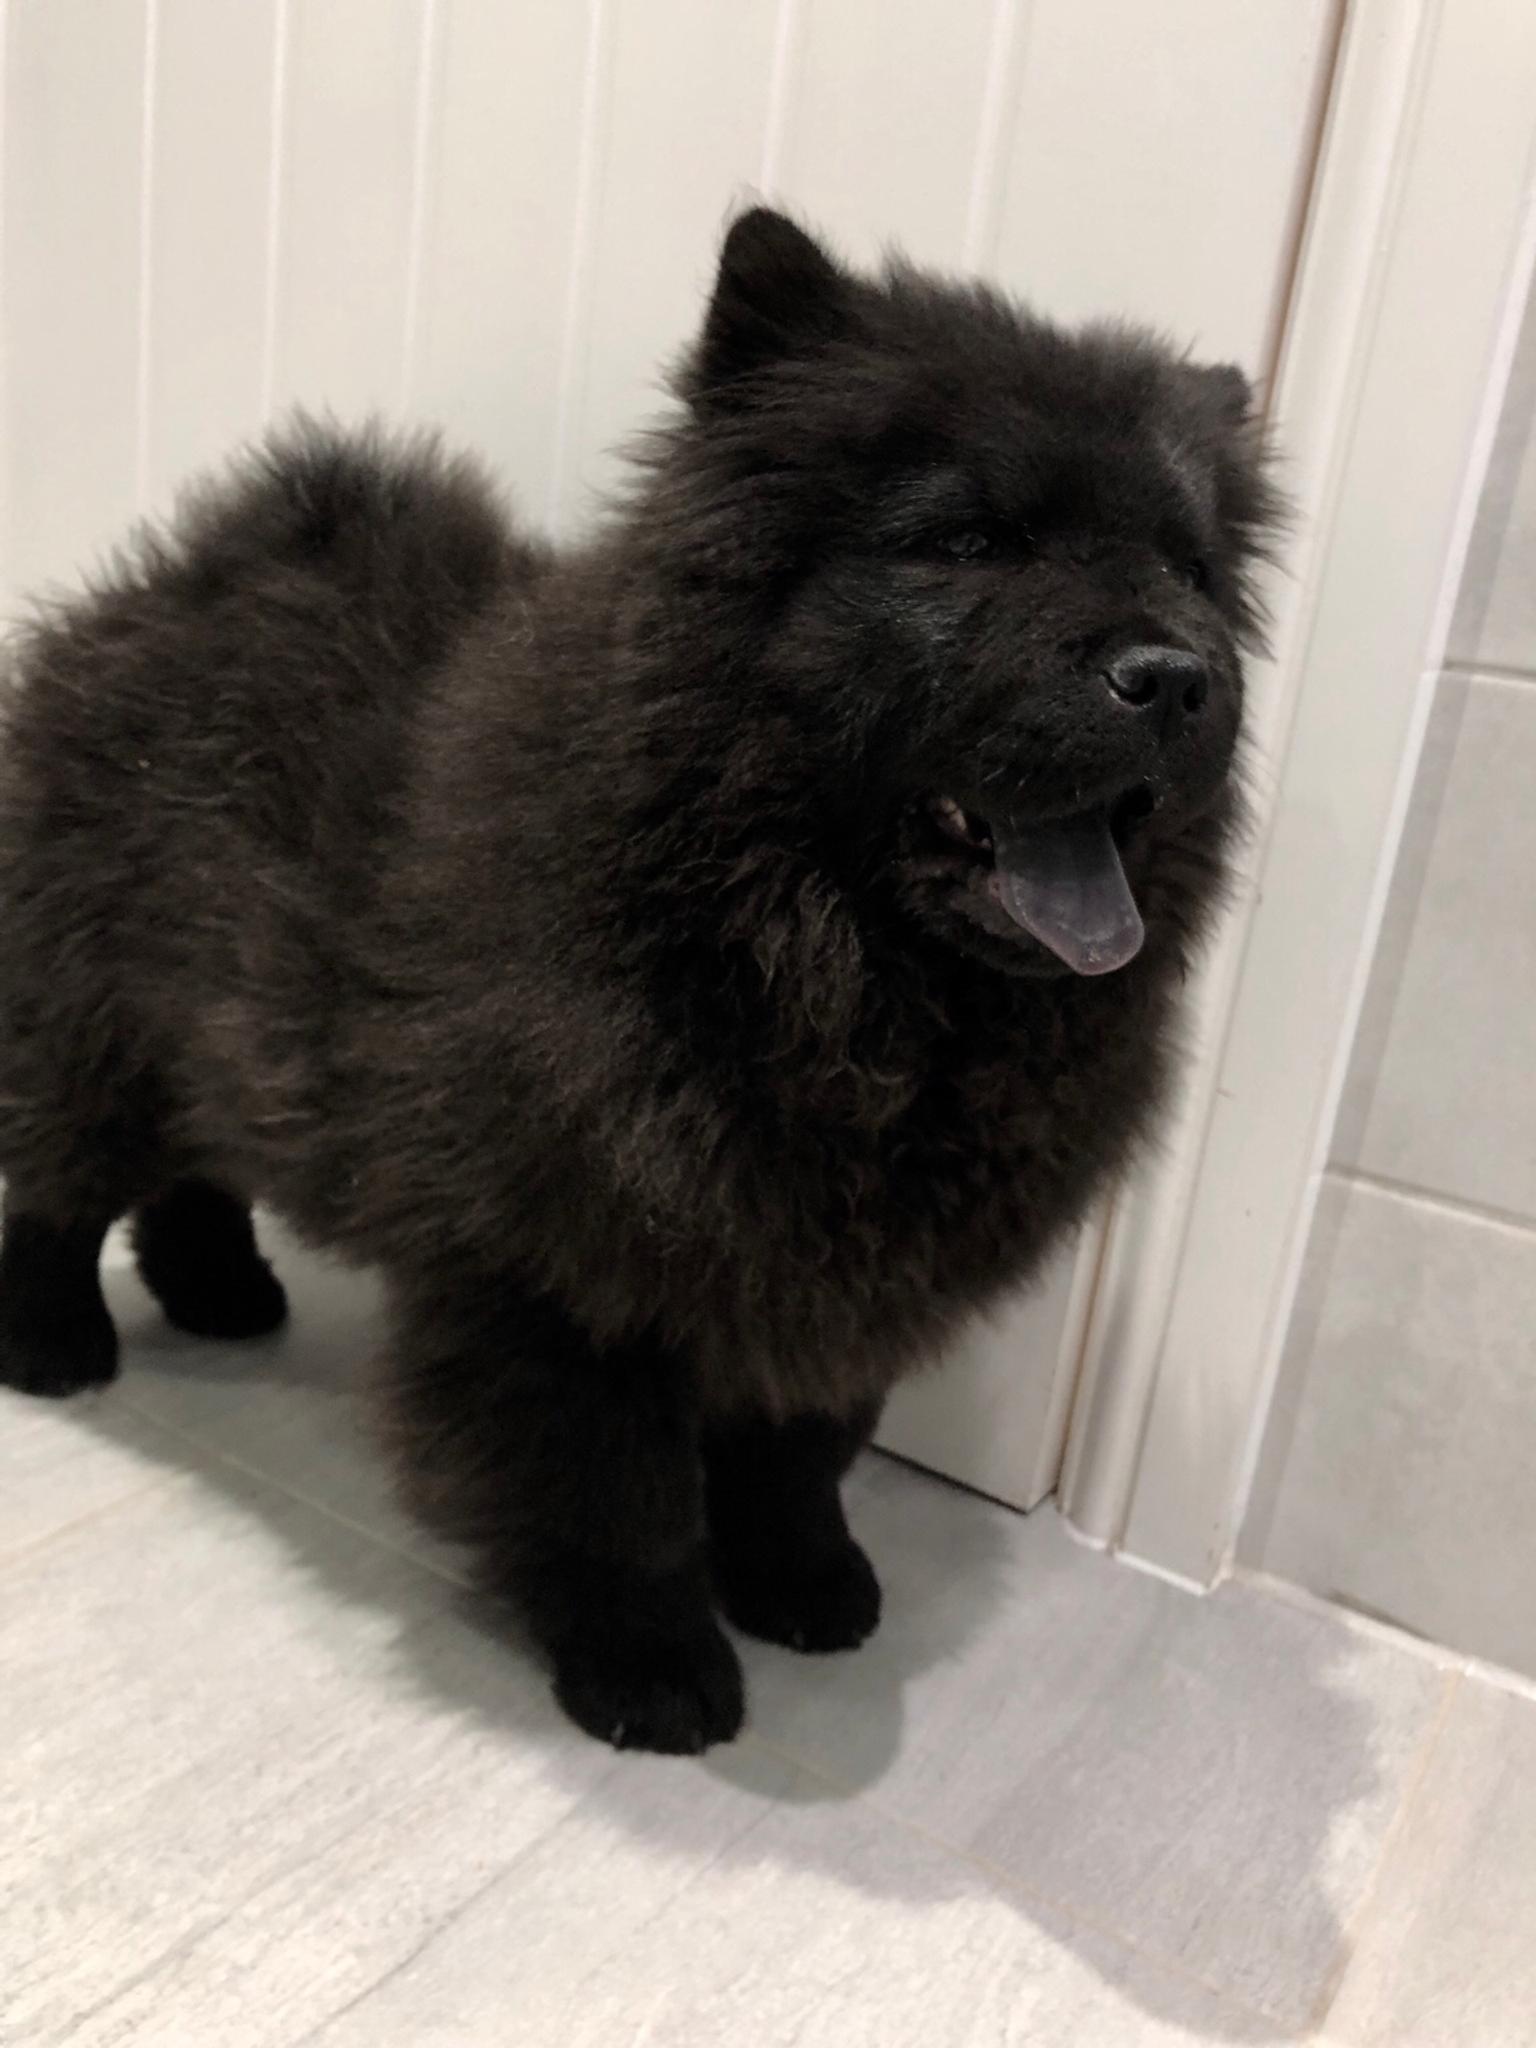 Black Chow Chow puppy in London for £650.00 for sale Shpock